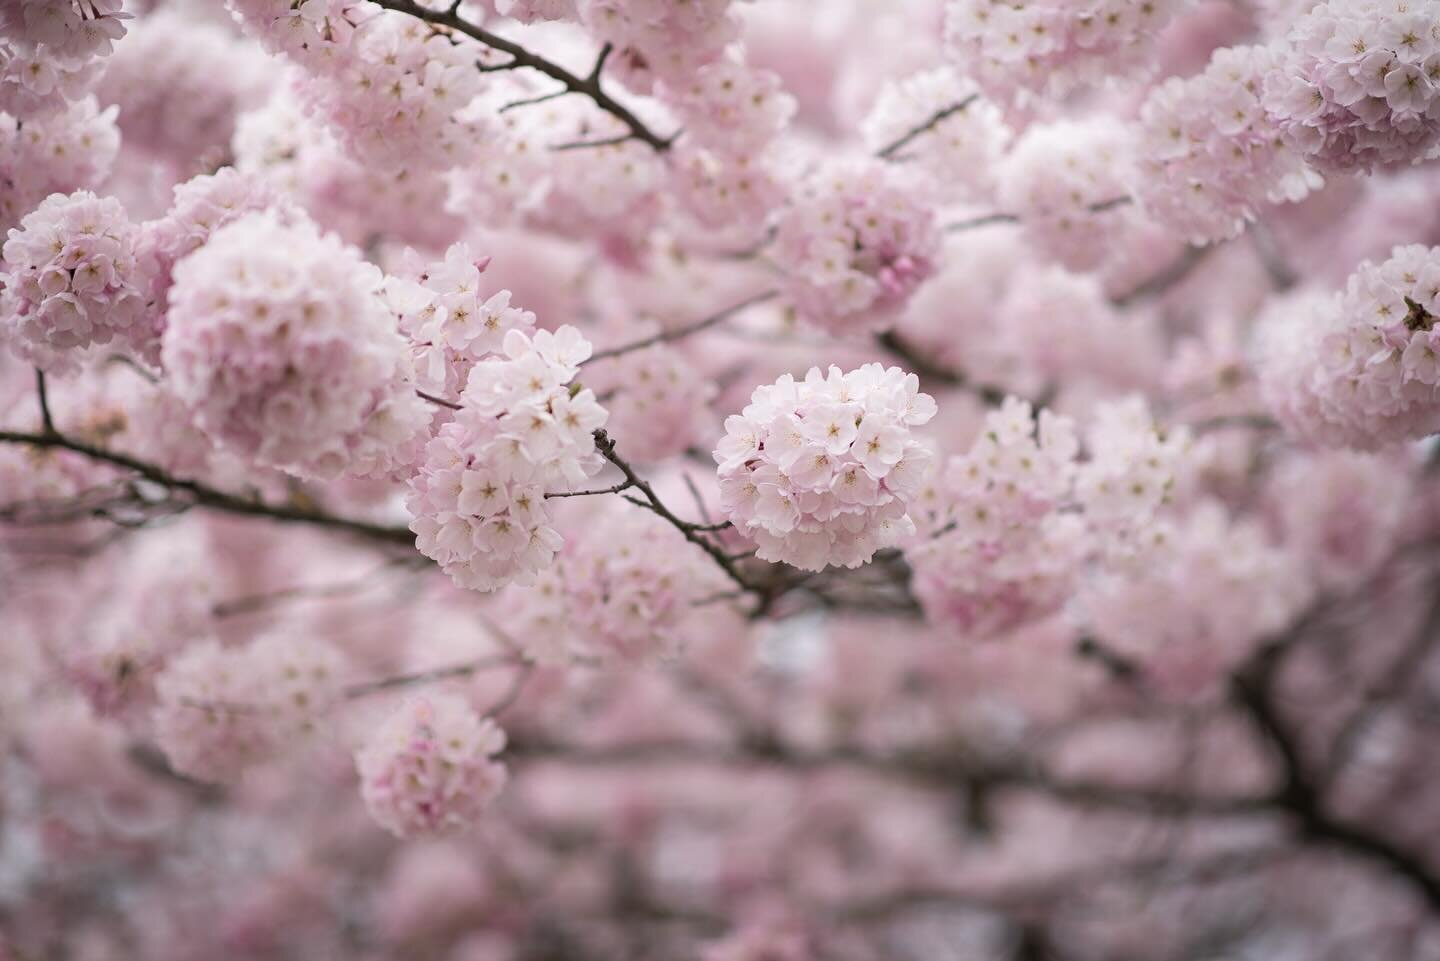 It&rsquo;s cherry blossom time! I&rsquo;m excited to go back to the waterfront later this week. There are lots of blossoming trees in Hillsboro if anyone local wants to meet me in the beautiful blooms. 🌸